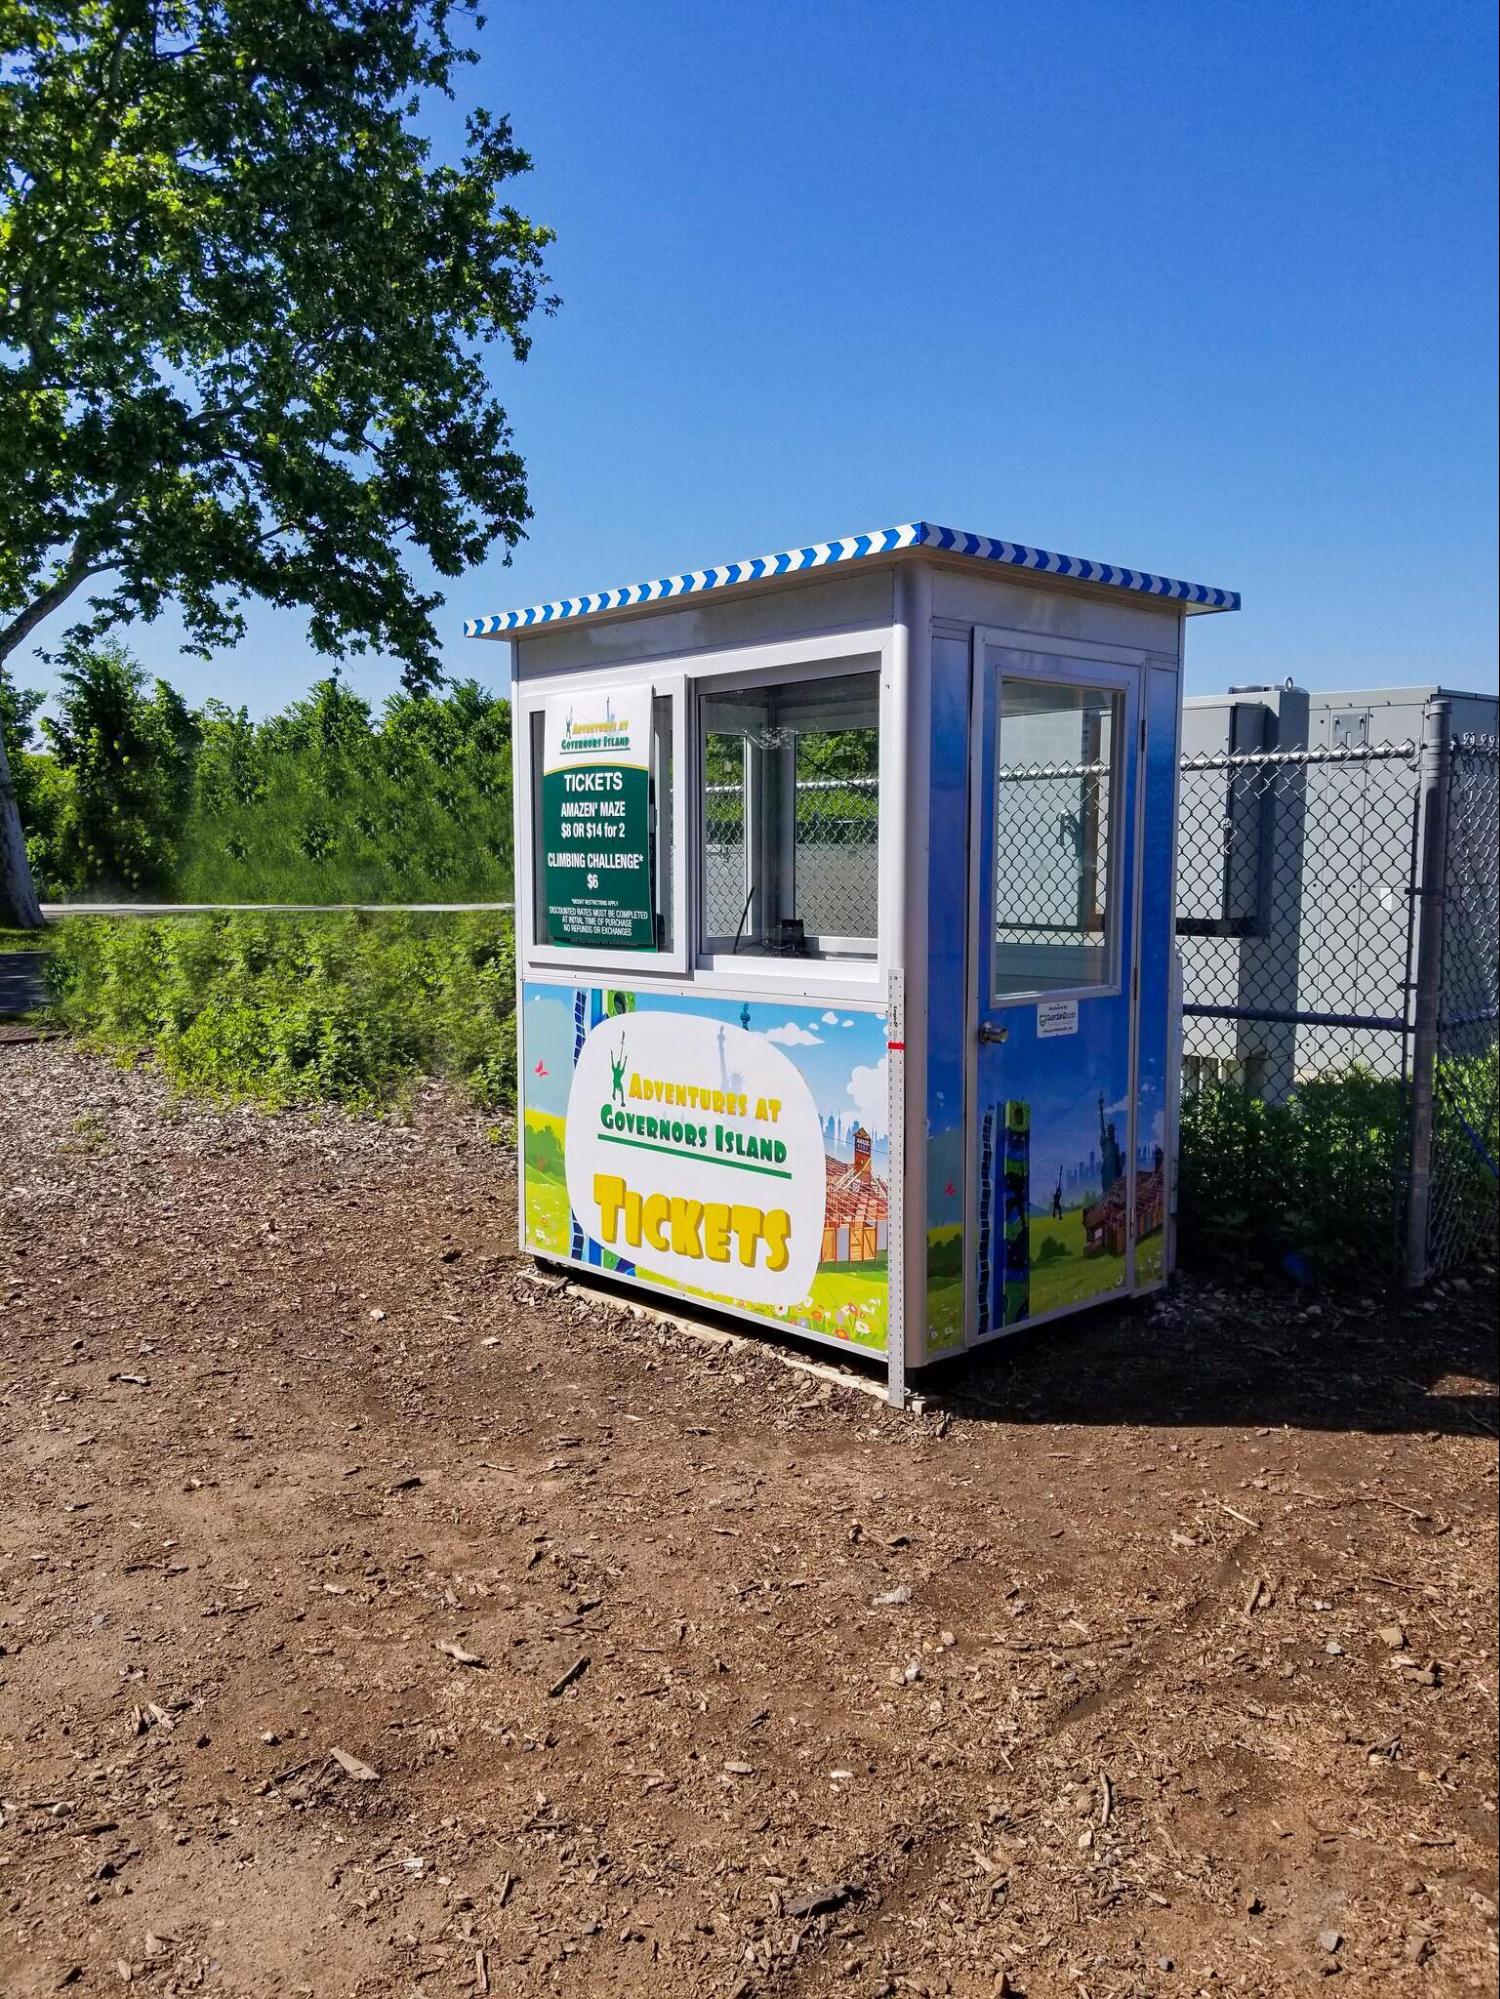 A modular structure in a wooded area features a ticket price banner, a customer service window, and brightly decorated walls